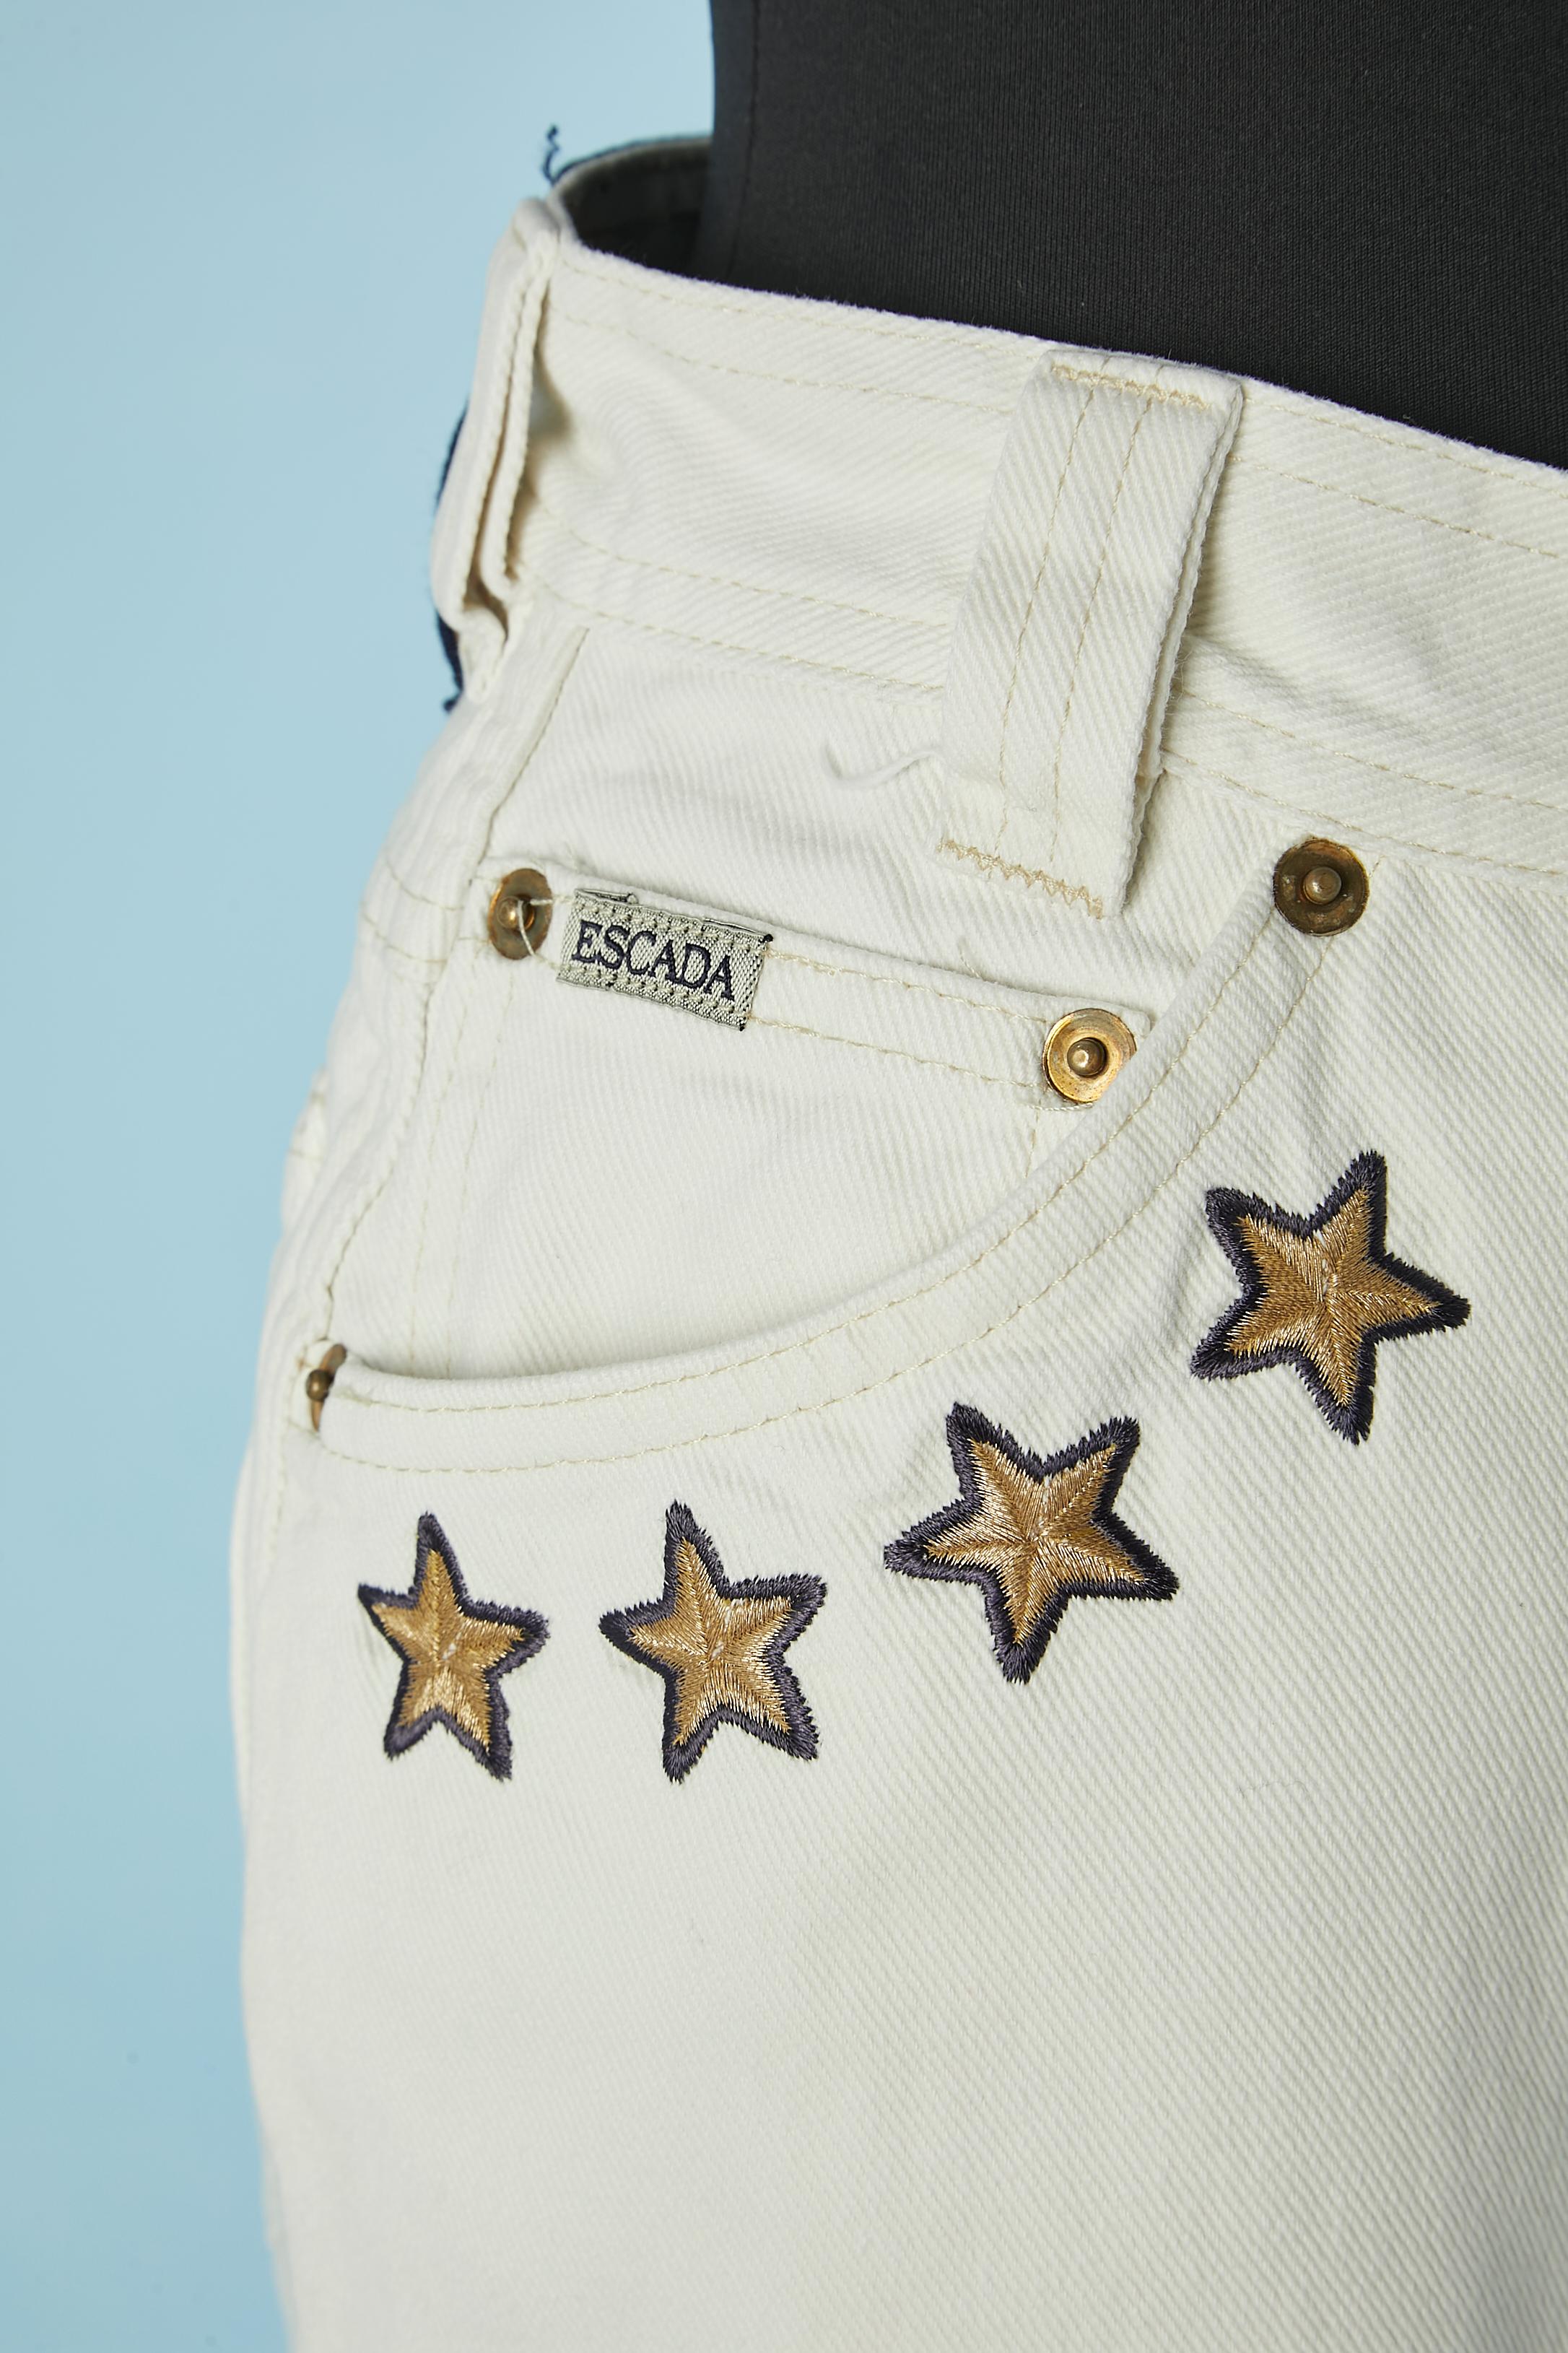 Off-white denim jean with stars and anchor threads embroideries Escada  In Excellent Condition For Sale In Saint-Ouen-Sur-Seine, FR